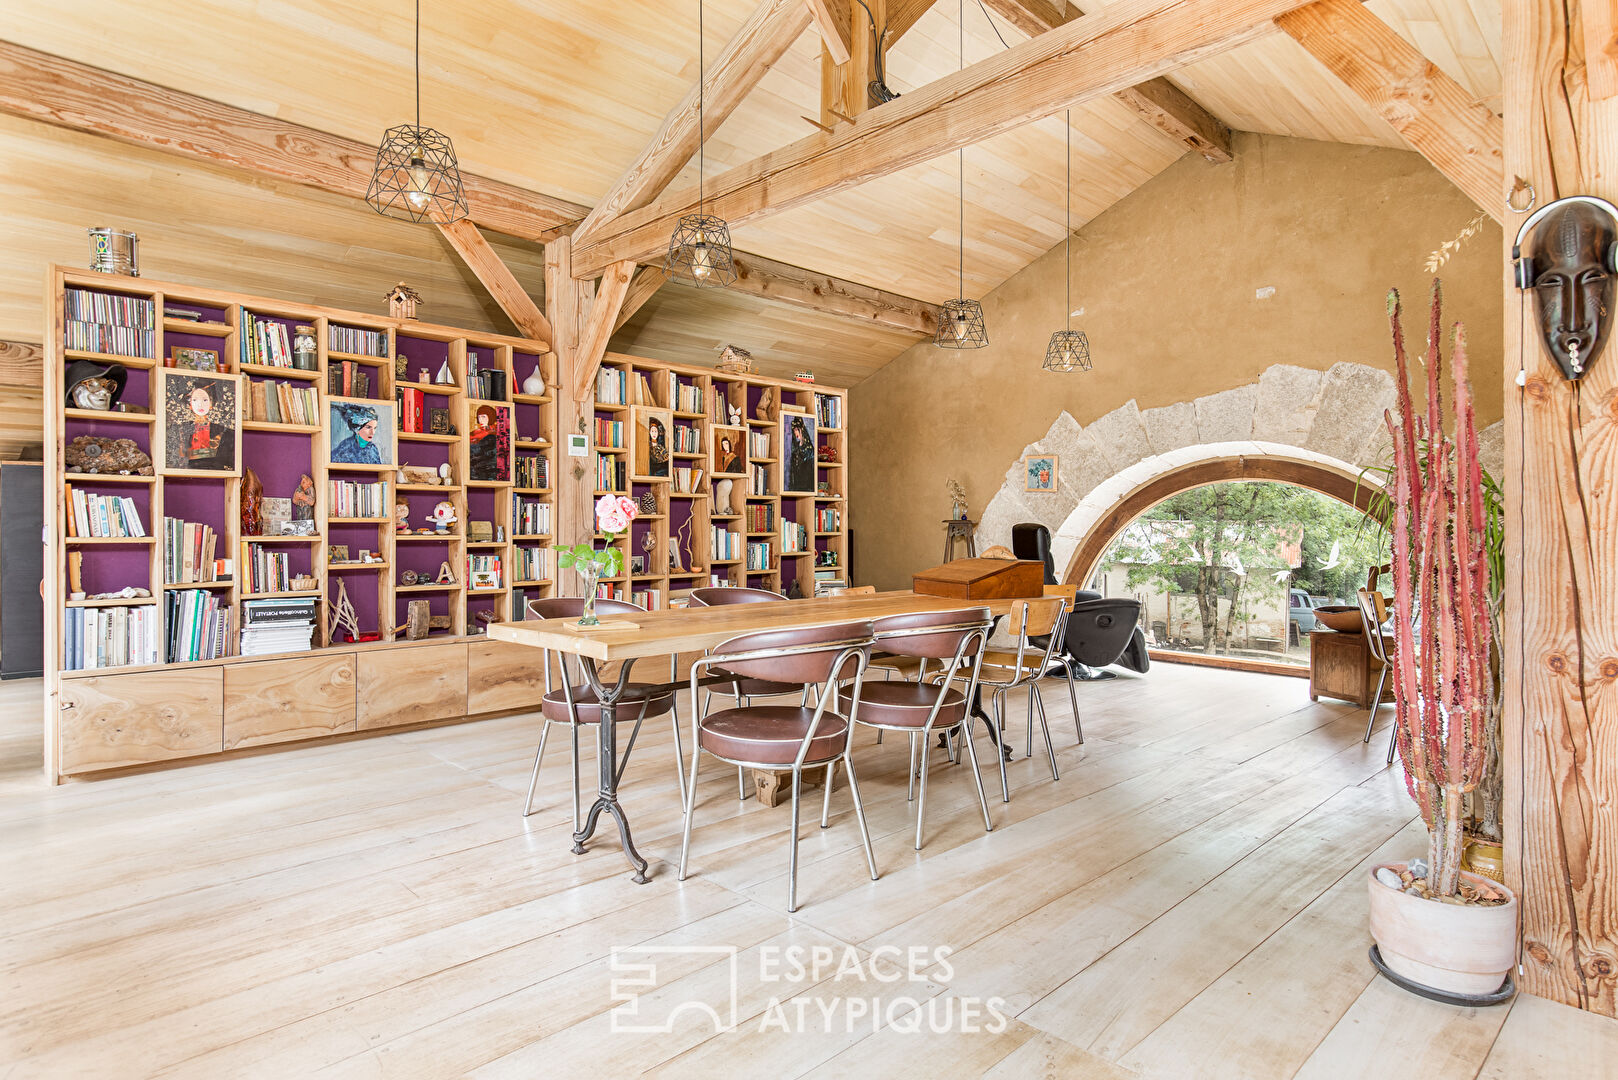 A loft at the foot of one of France’s most beautiful villages.